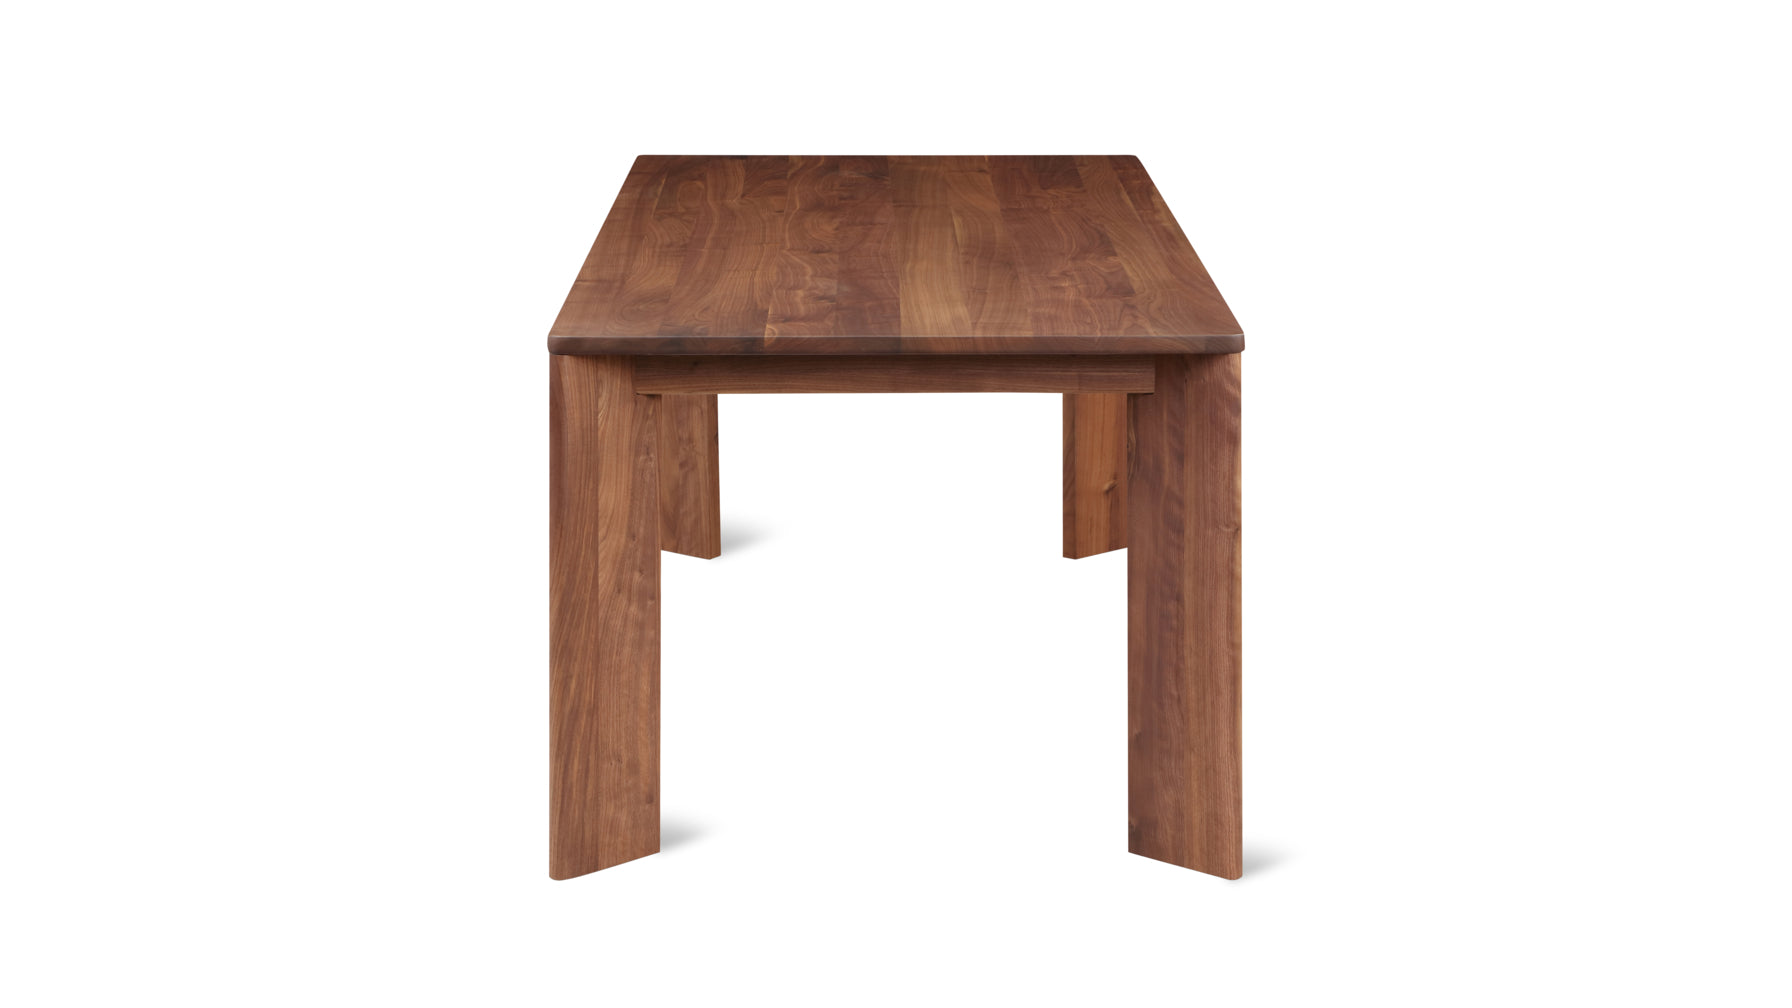 Frame Dining Table, Seats 6-8 People, American Walnut - Image 3